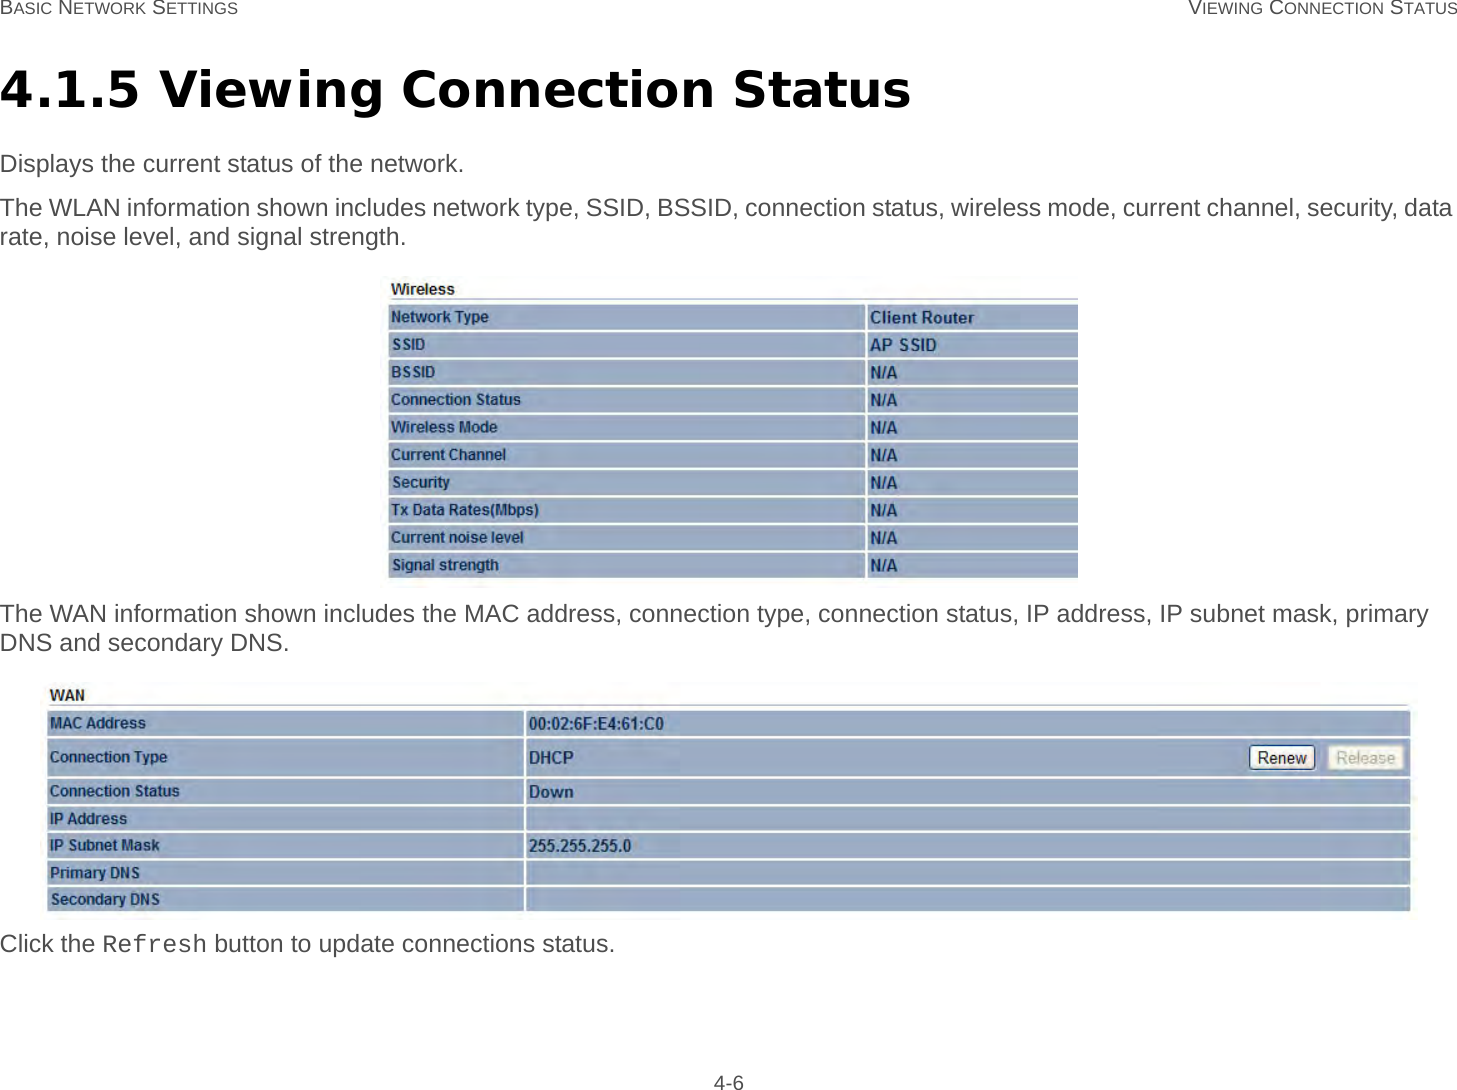 BASIC NETWORK SETTINGS VIEWING CONNECTION STATUS 4-64.1.5 Viewing Connection StatusDisplays the current status of the network.The WLAN information shown includes network type, SSID, BSSID, connection status, wireless mode, current channel, security, data rate, noise level, and signal strength.The WAN information shown includes the MAC address, connection type, connection status, IP address, IP subnet mask, primary DNS and secondary DNS.Click the Refresh button to update connections status.